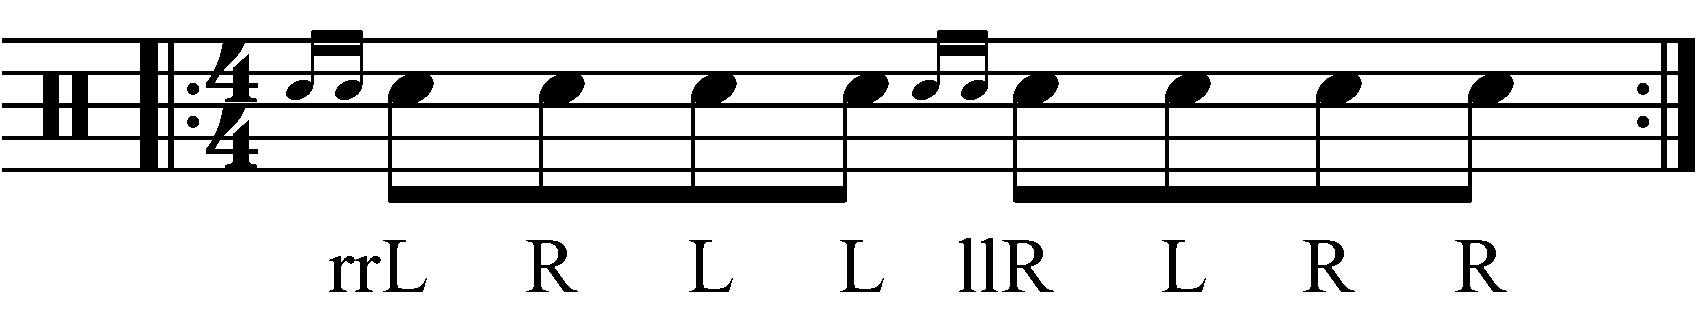 The Dragadiddle as eighth notes